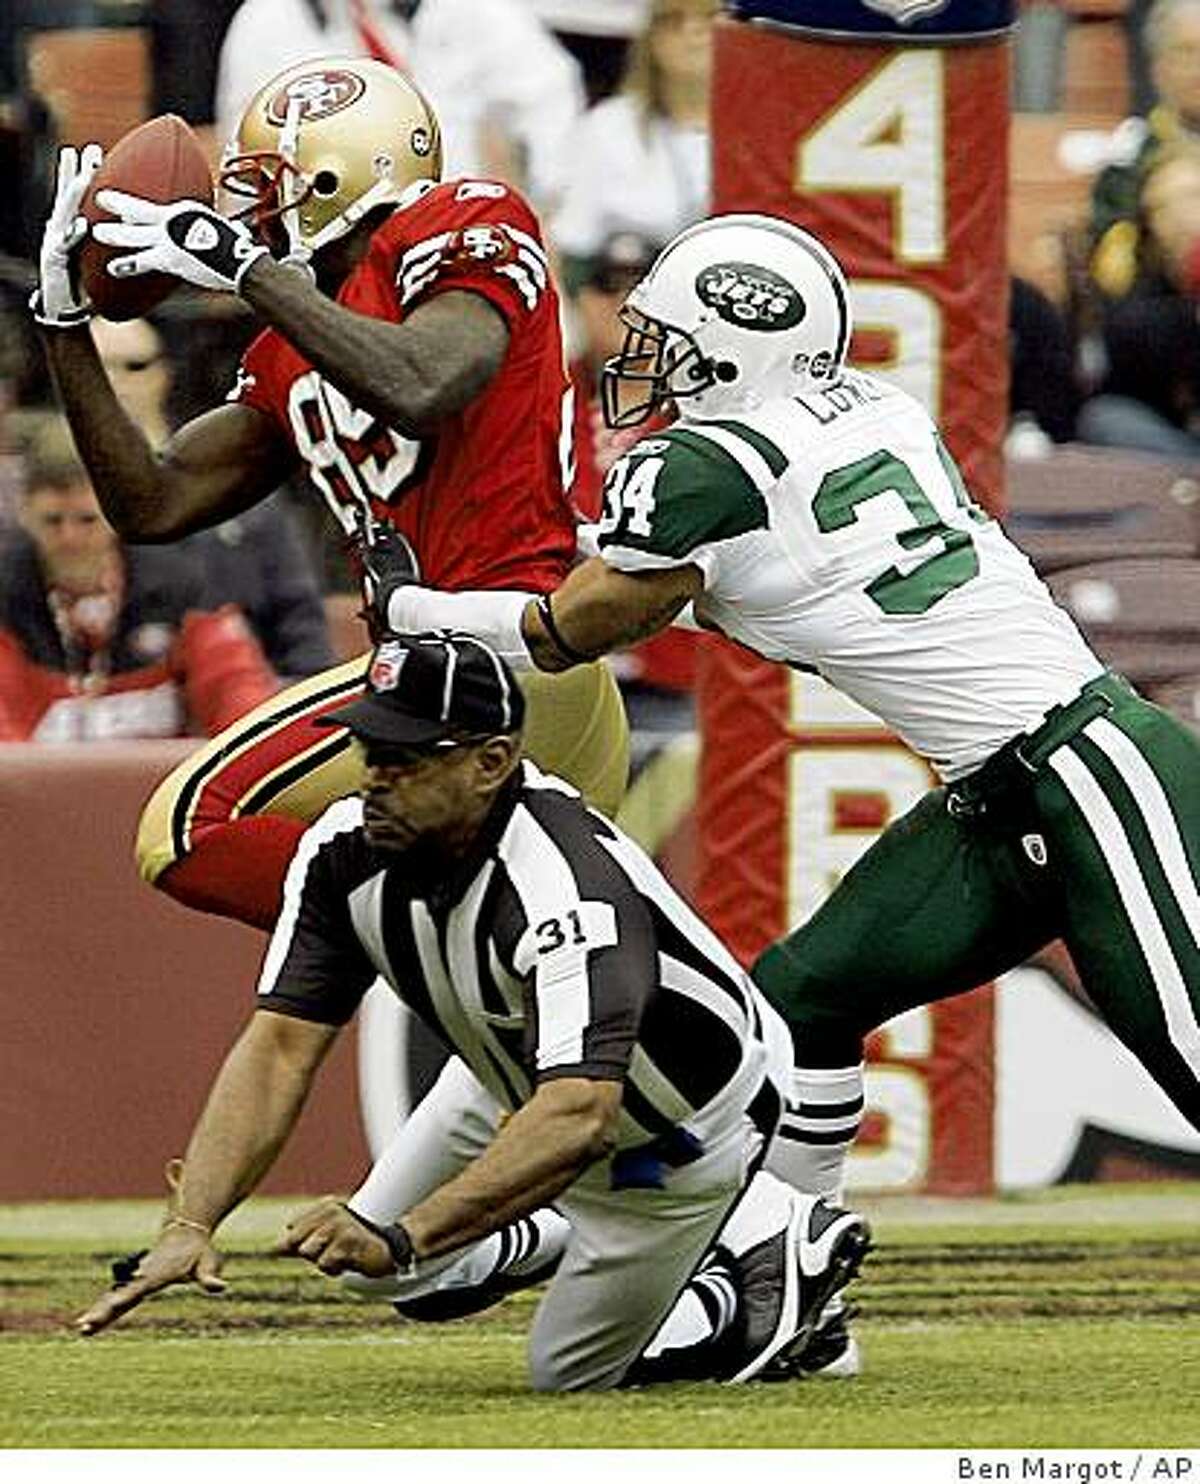 San Francisco 49ers' Vernon Davis, left, makes a reception past New York Jets' Dwight Lowery (34) as umpire Chad Brown (31) falls out of the way in the first half of an NFL football game Sunday, Dec. 7, 2008, in San Francisco. Davis fumbled the ball, which was picked up by 49ers' Joe Staley for a touchdown. (AP Photo/Ben Margot)